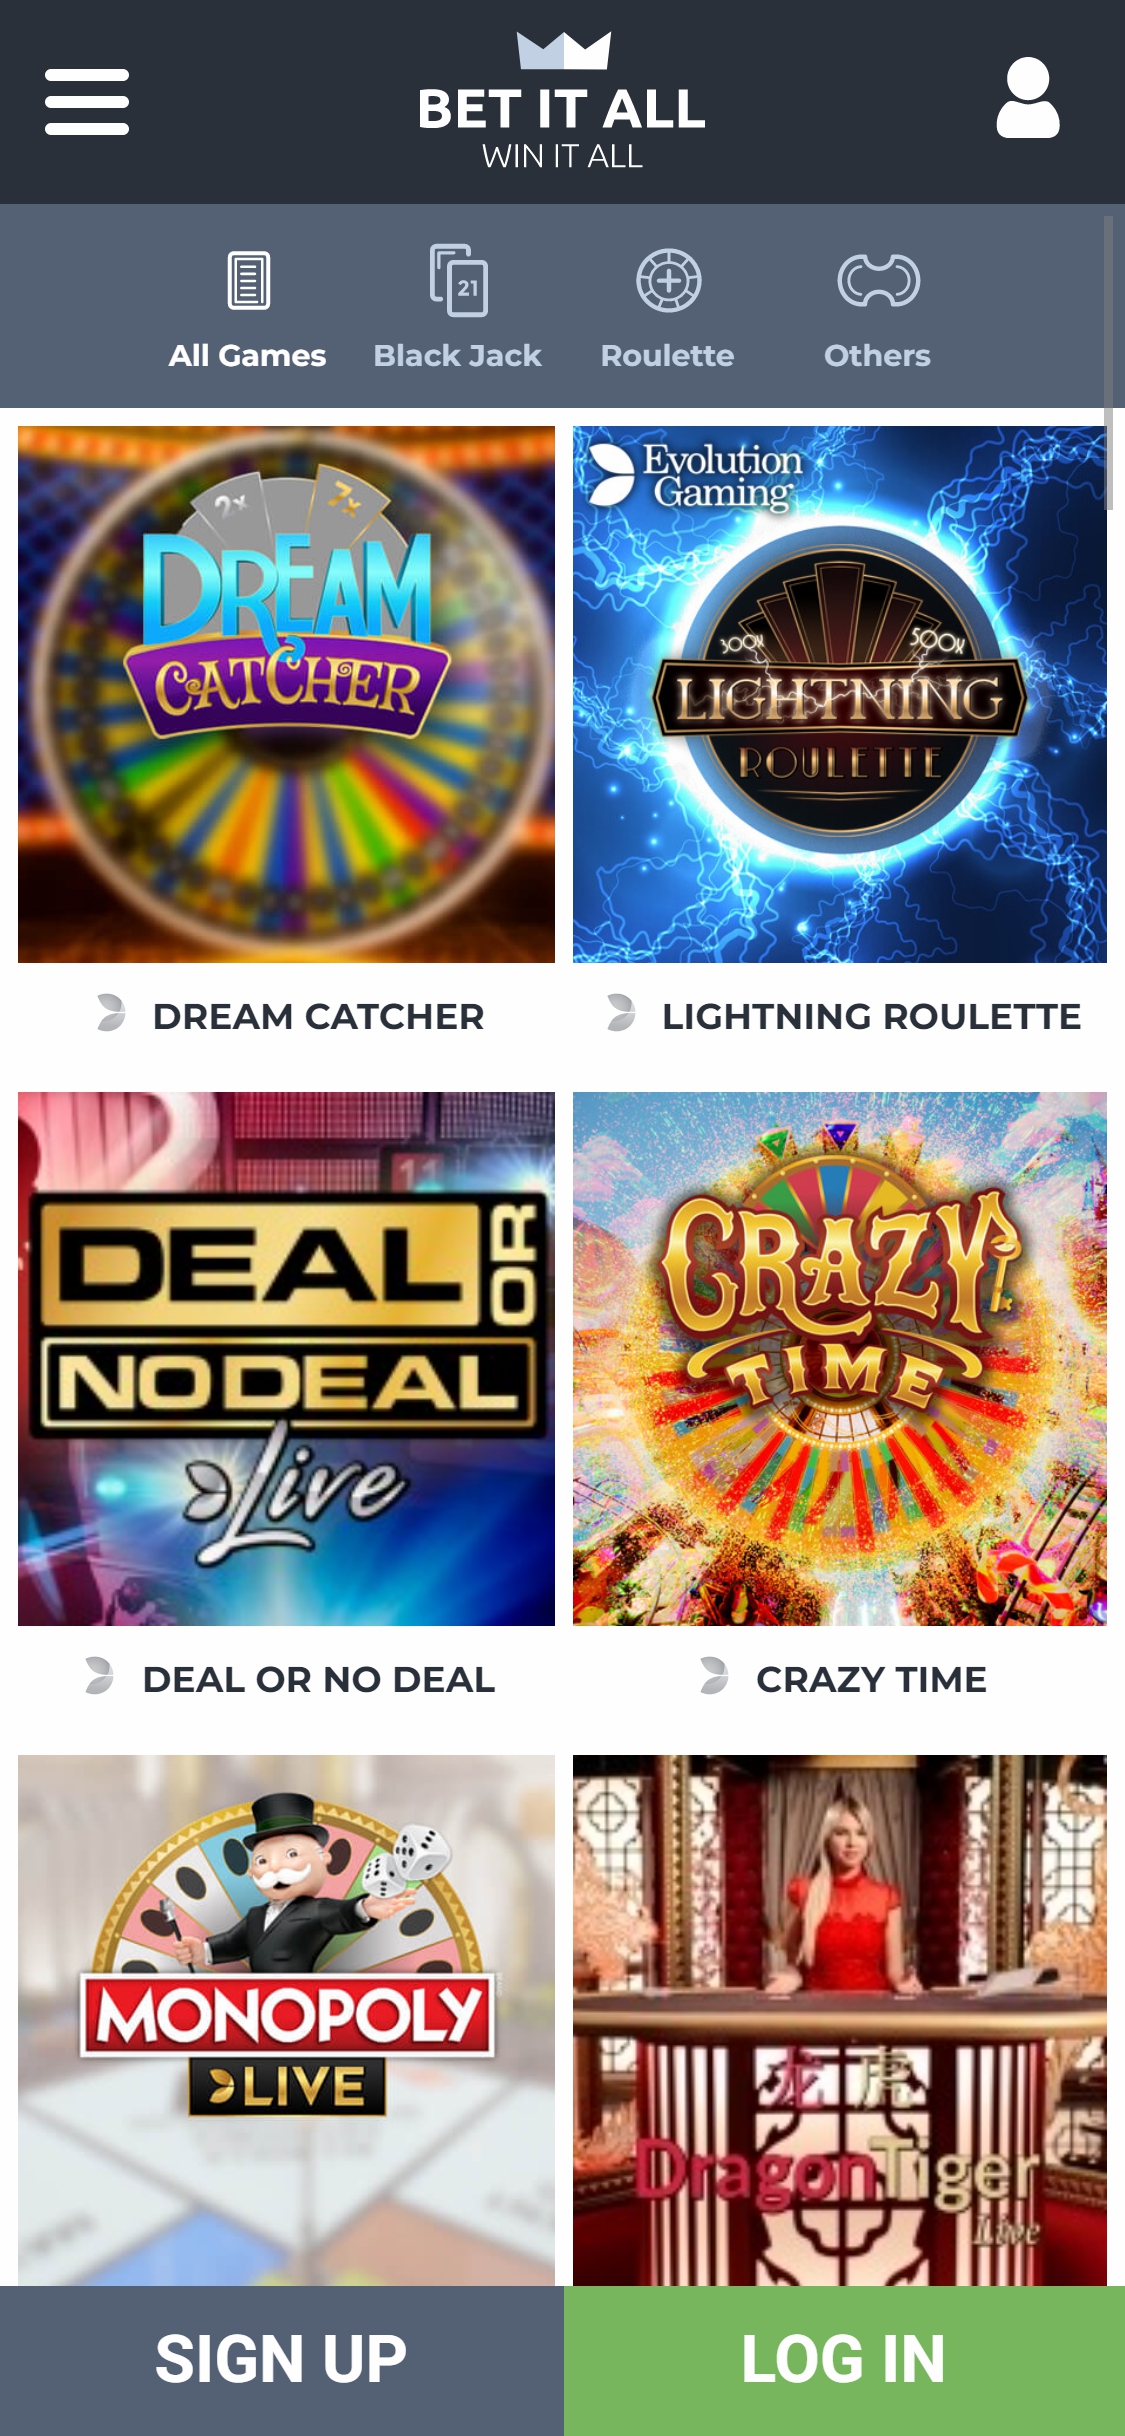 Bet It All Casino Mobile Live Dealer Games Review